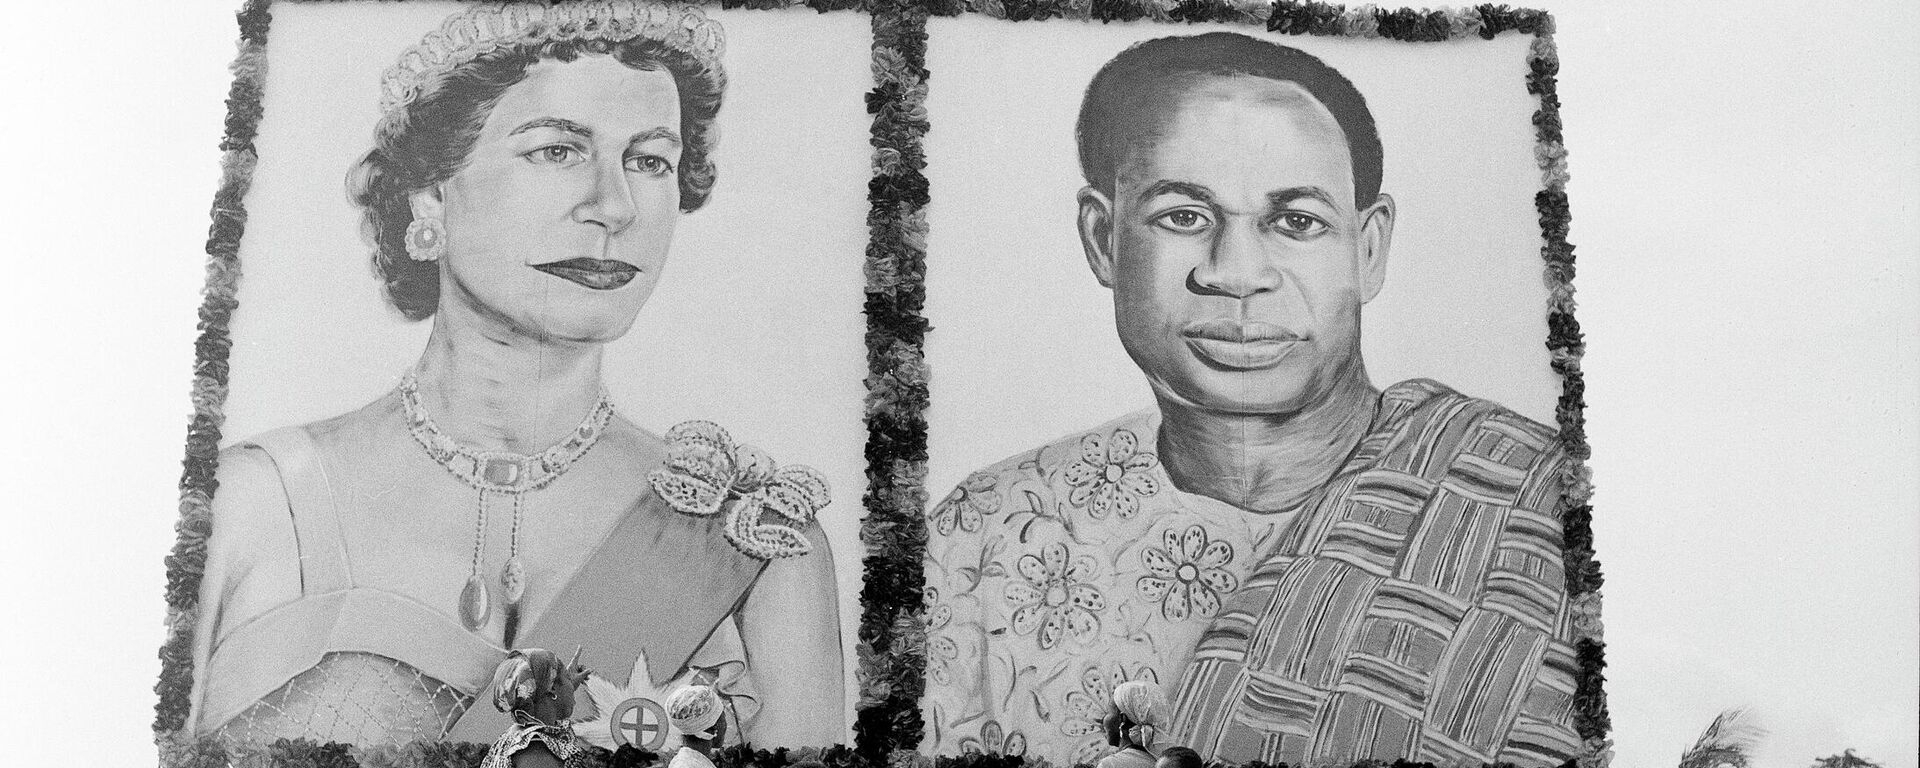 Huge portraits of Britain's Queen Elizabeth II and Ghana's President Kwame Nkrumah are displayed in Accra, Nov. 9, 1961, as the city prepared for the arrival of the British monarch on a state visit to Ghana. - Sputnik International, 1920, 08.09.2022